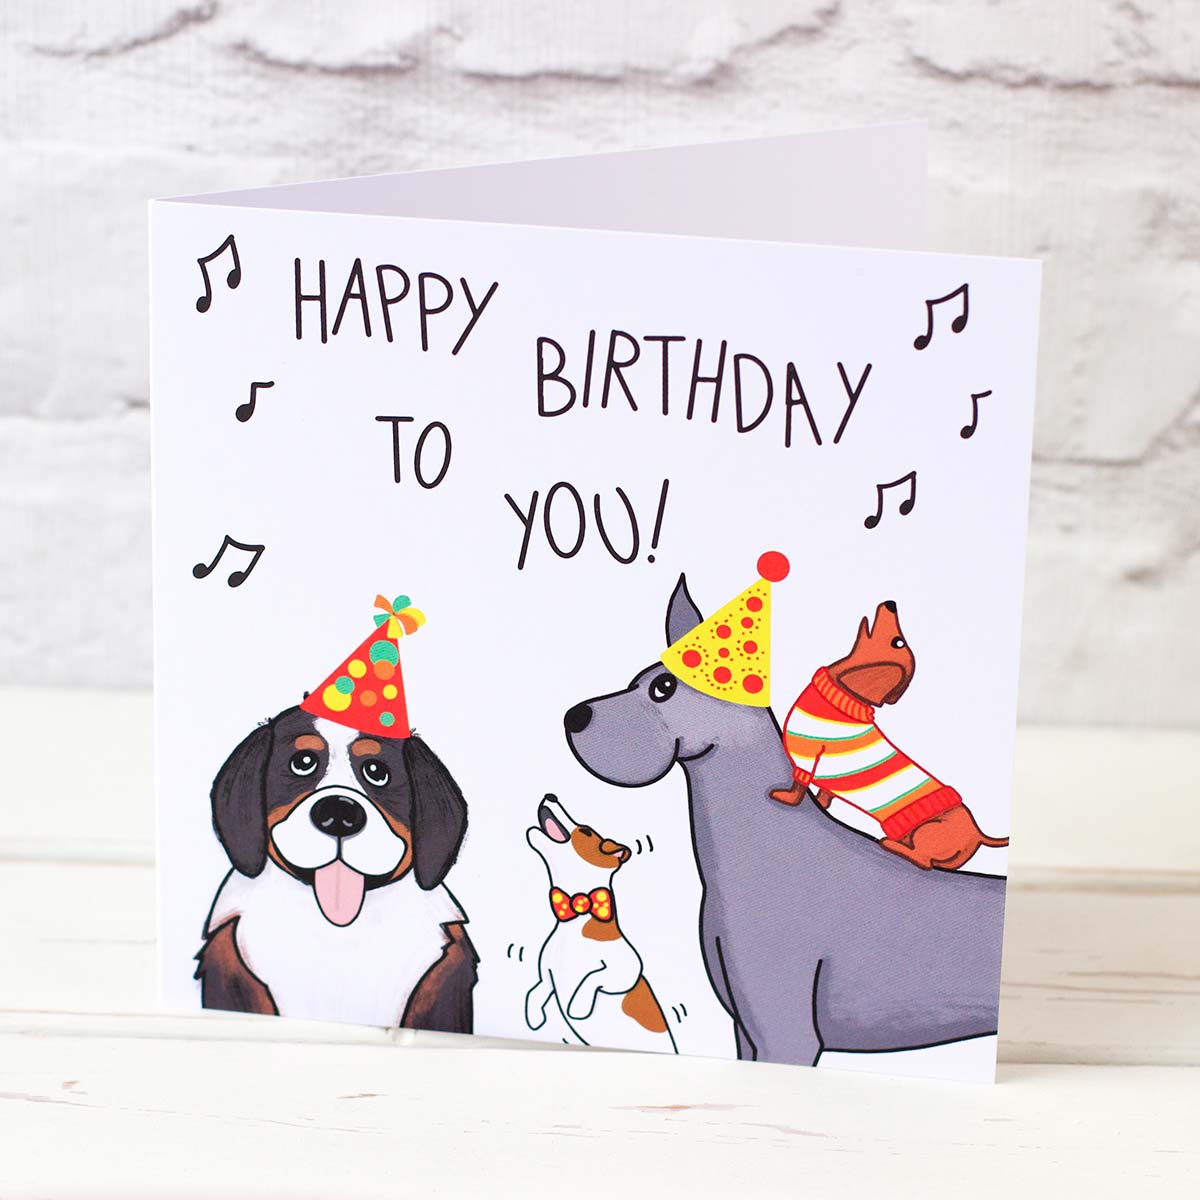 Large and small breeds in party outfits singing Happy Birthday in a card that is stood up